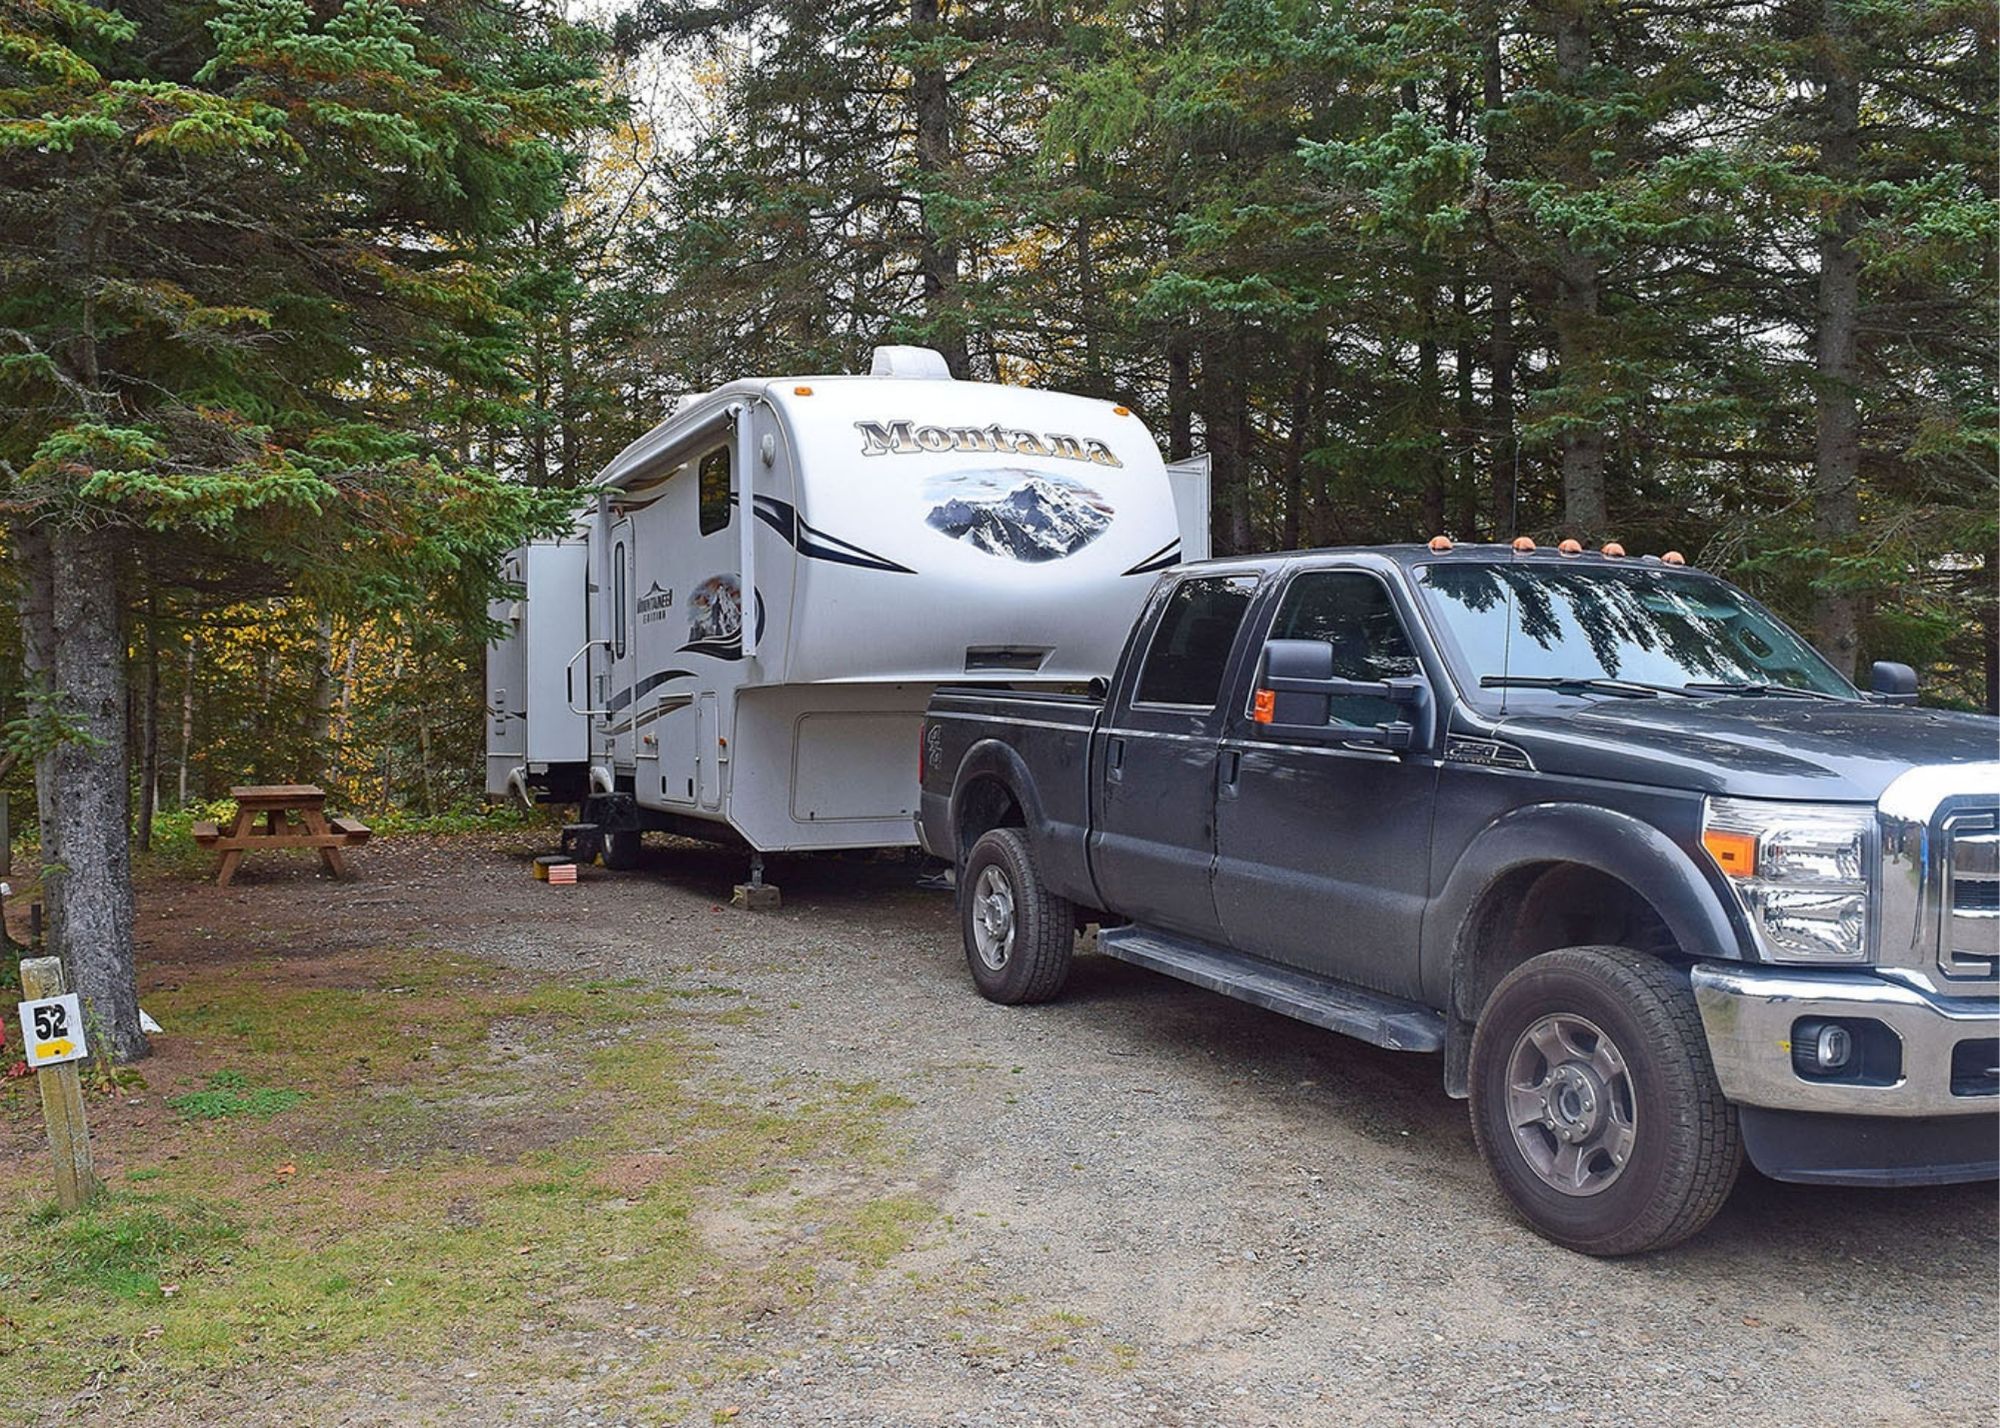 An Truck towing an RV parked at Wawa RV Park and Campground, another place to stay when RVing in White River, Ontario.